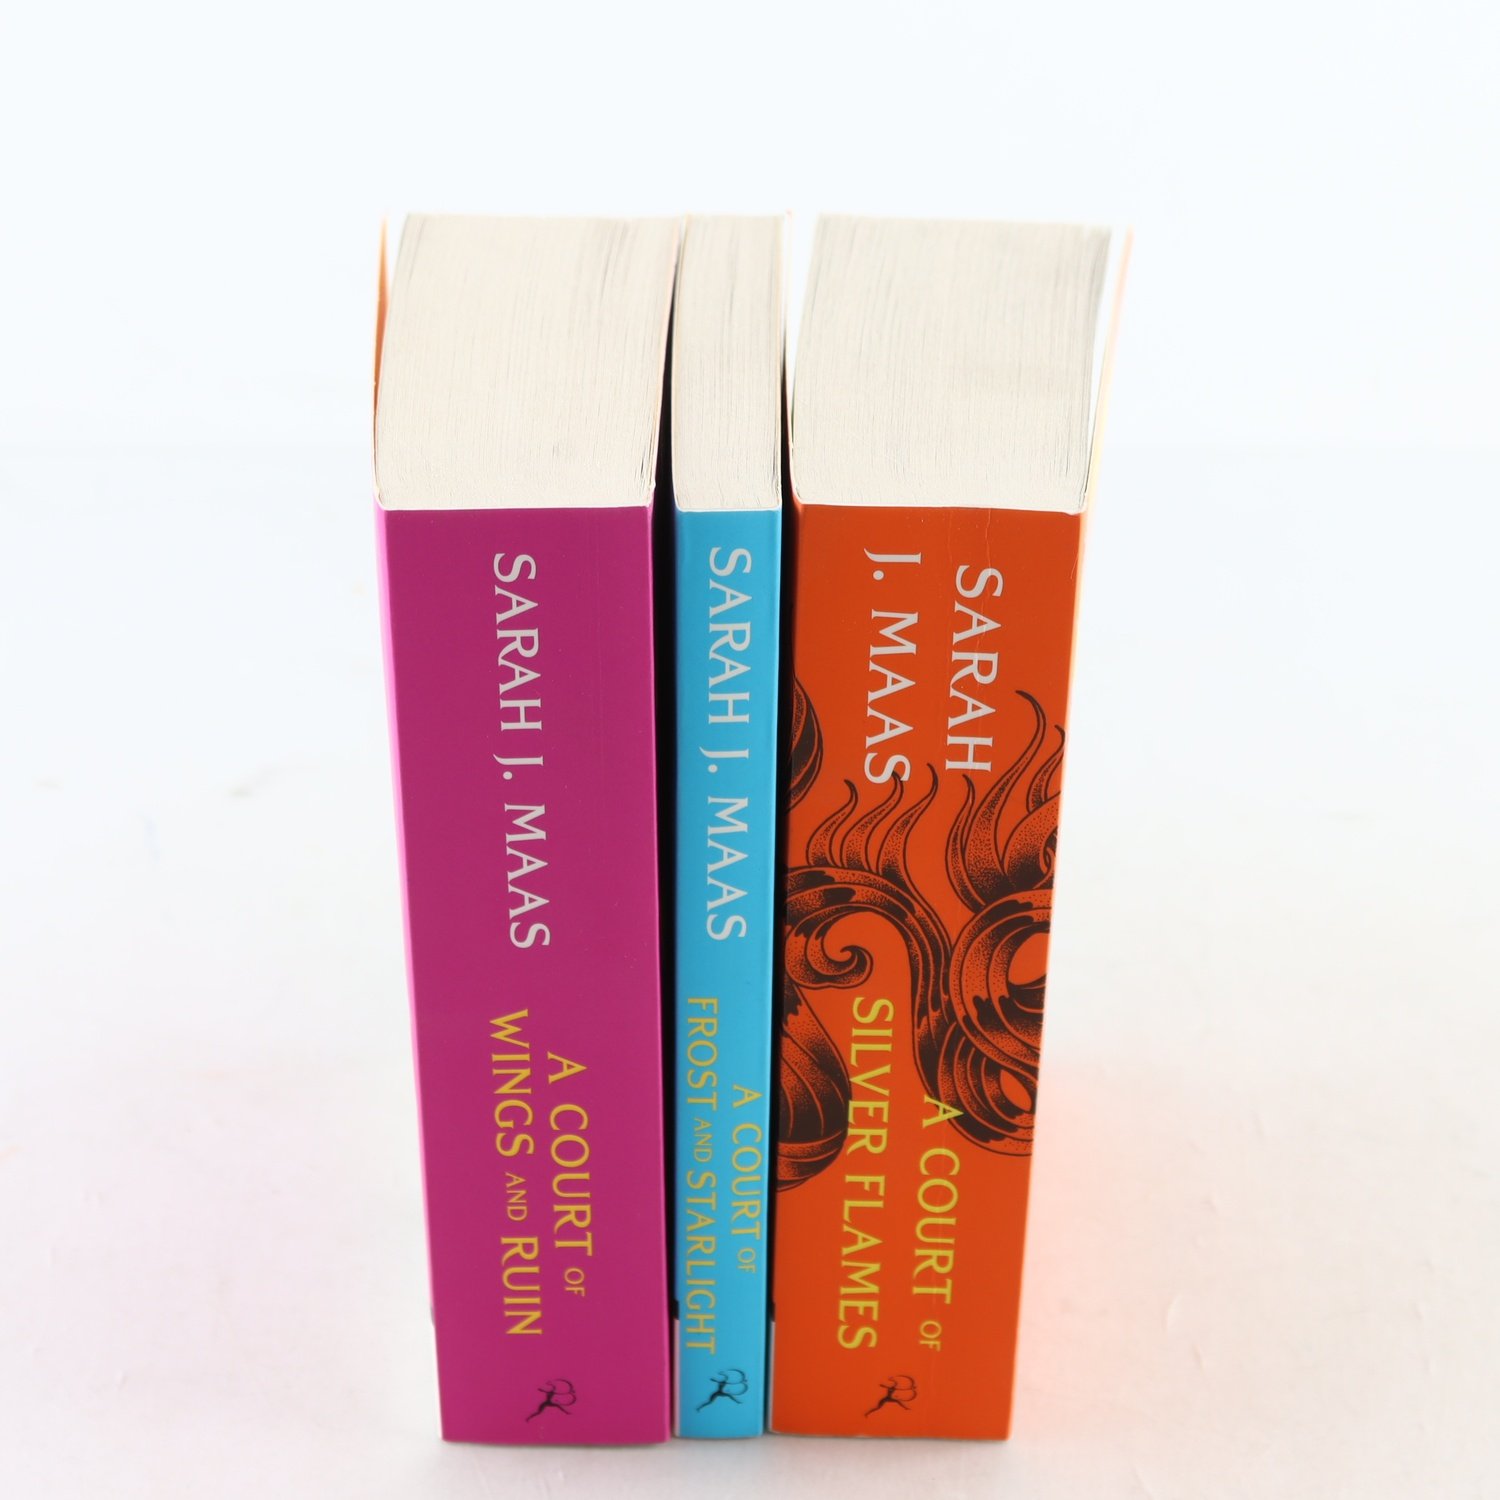 Sarah J. Maas, 3 Vol., A Court of Wings and Ruin + 2